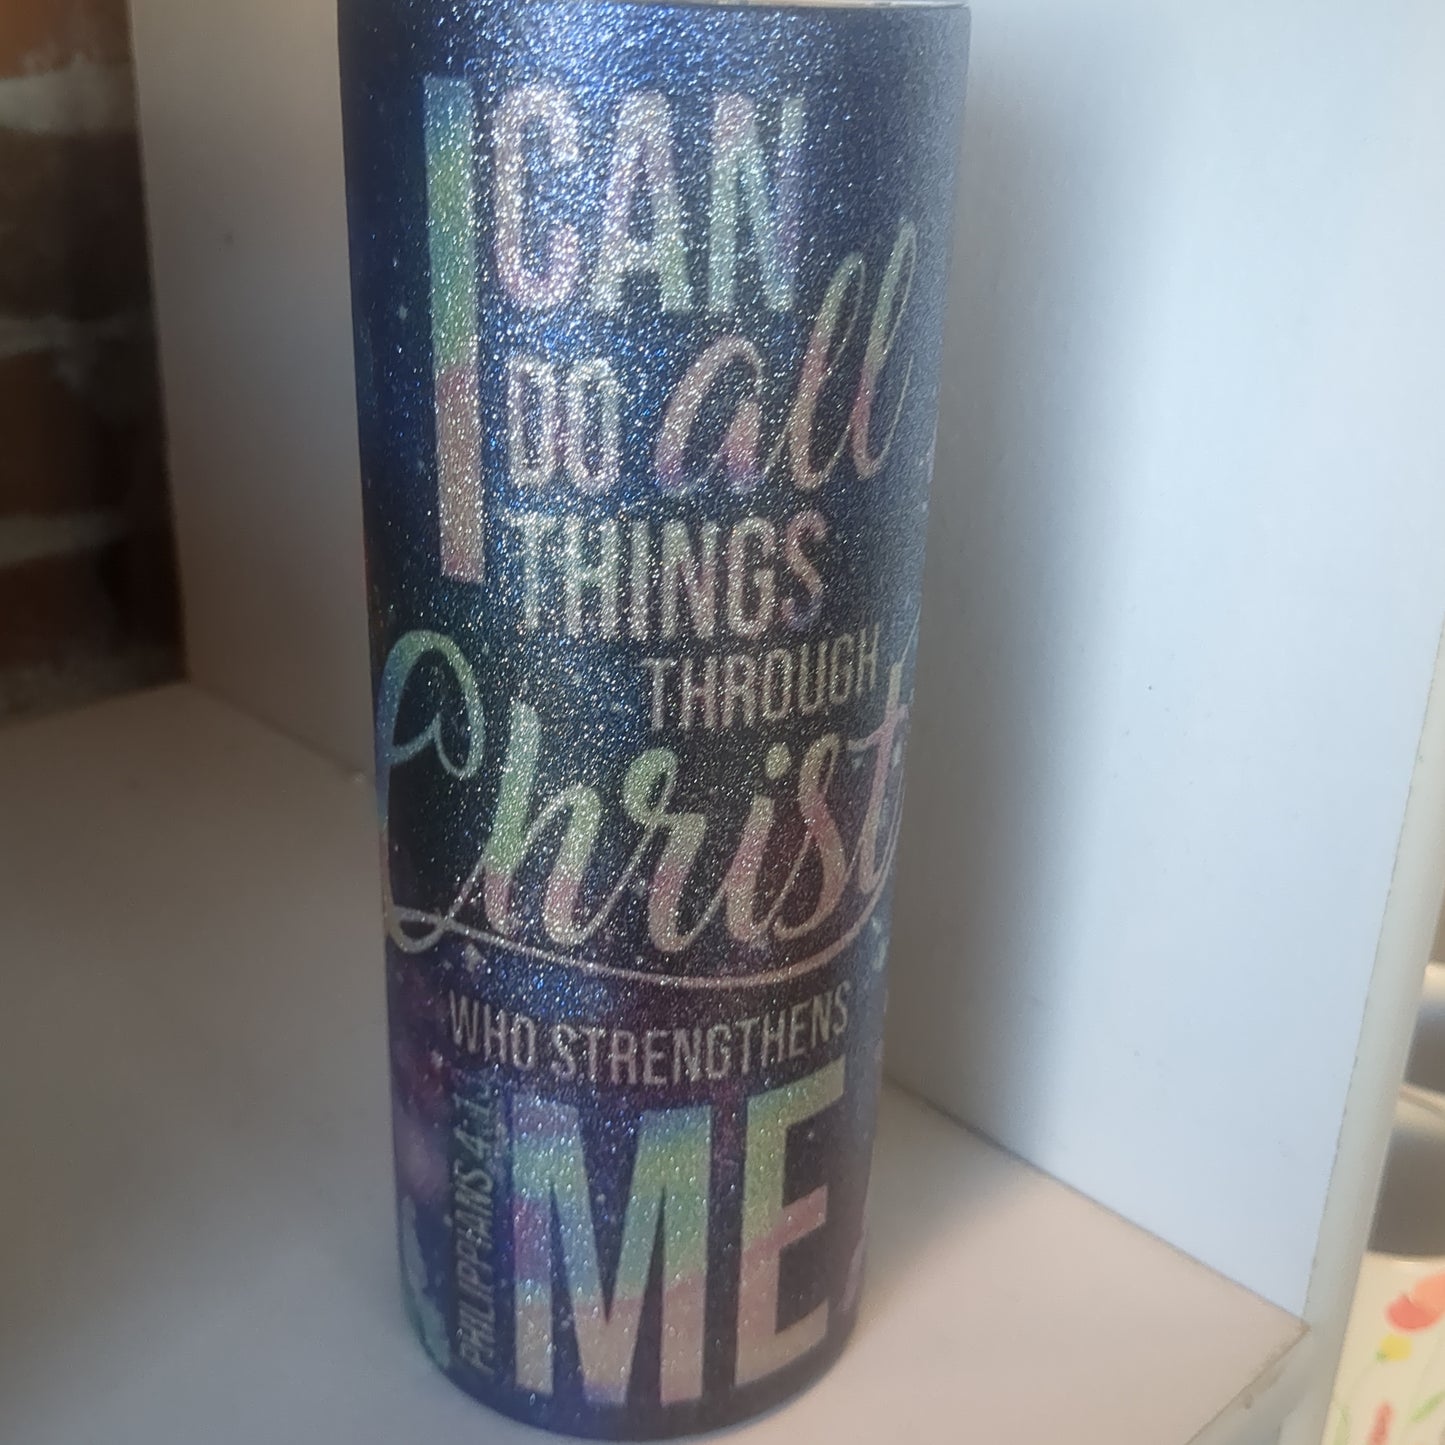 25 Oz Stainless Steel, Insulated, Fatty, glitter Tumbler.  I can do all thing through him